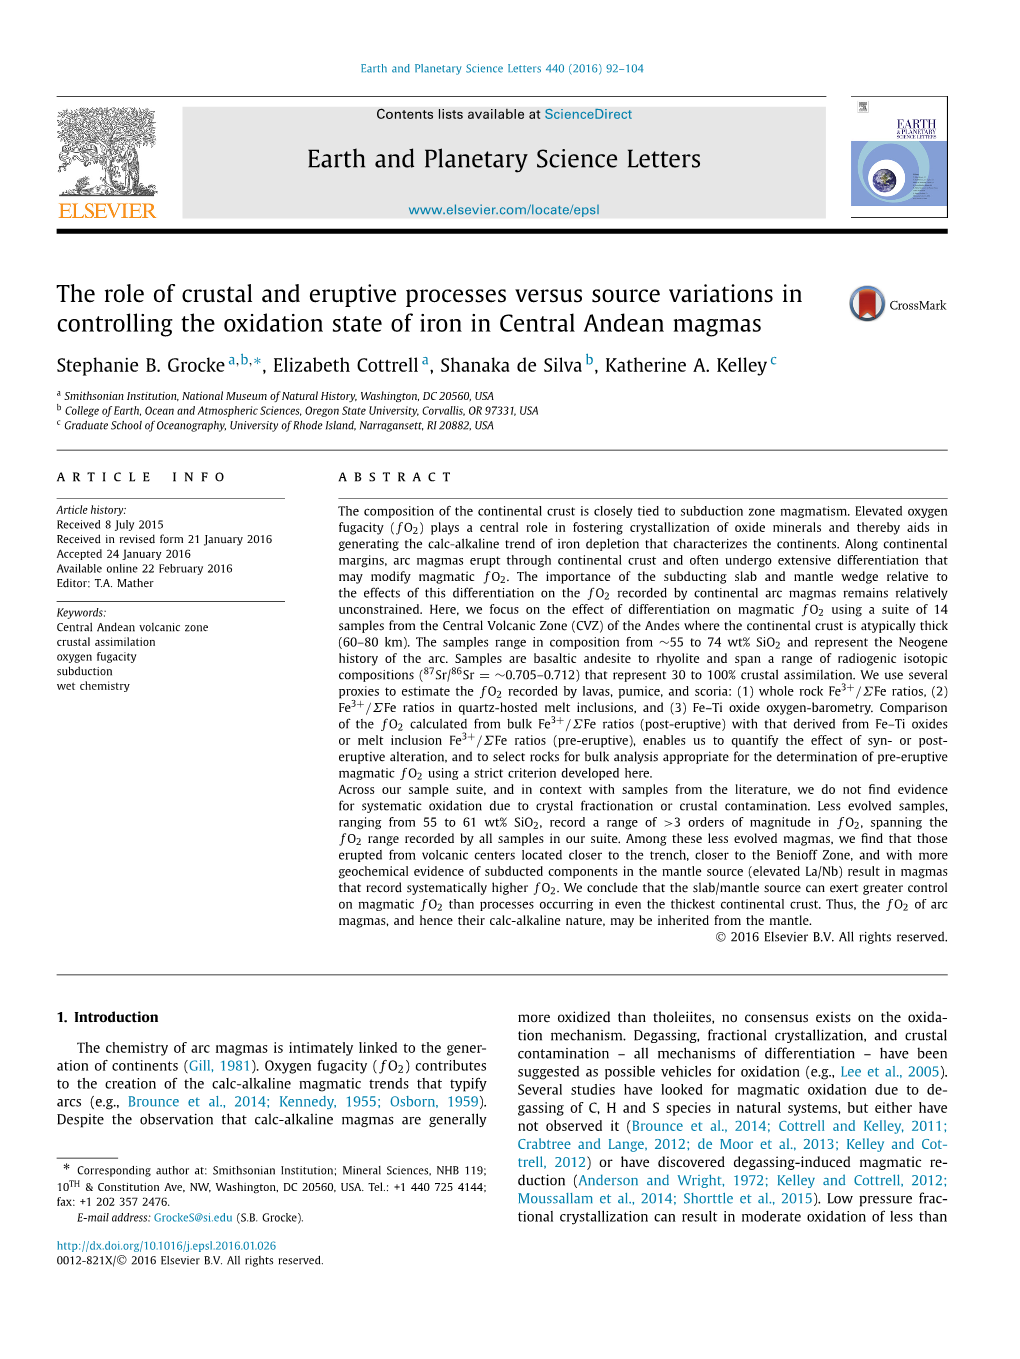 The Role of Crustal and Eruptive Processes Versus Source Variations in Controlling the Oxidation State of Iron in Central Andean Magmas ∗ Stephanie B